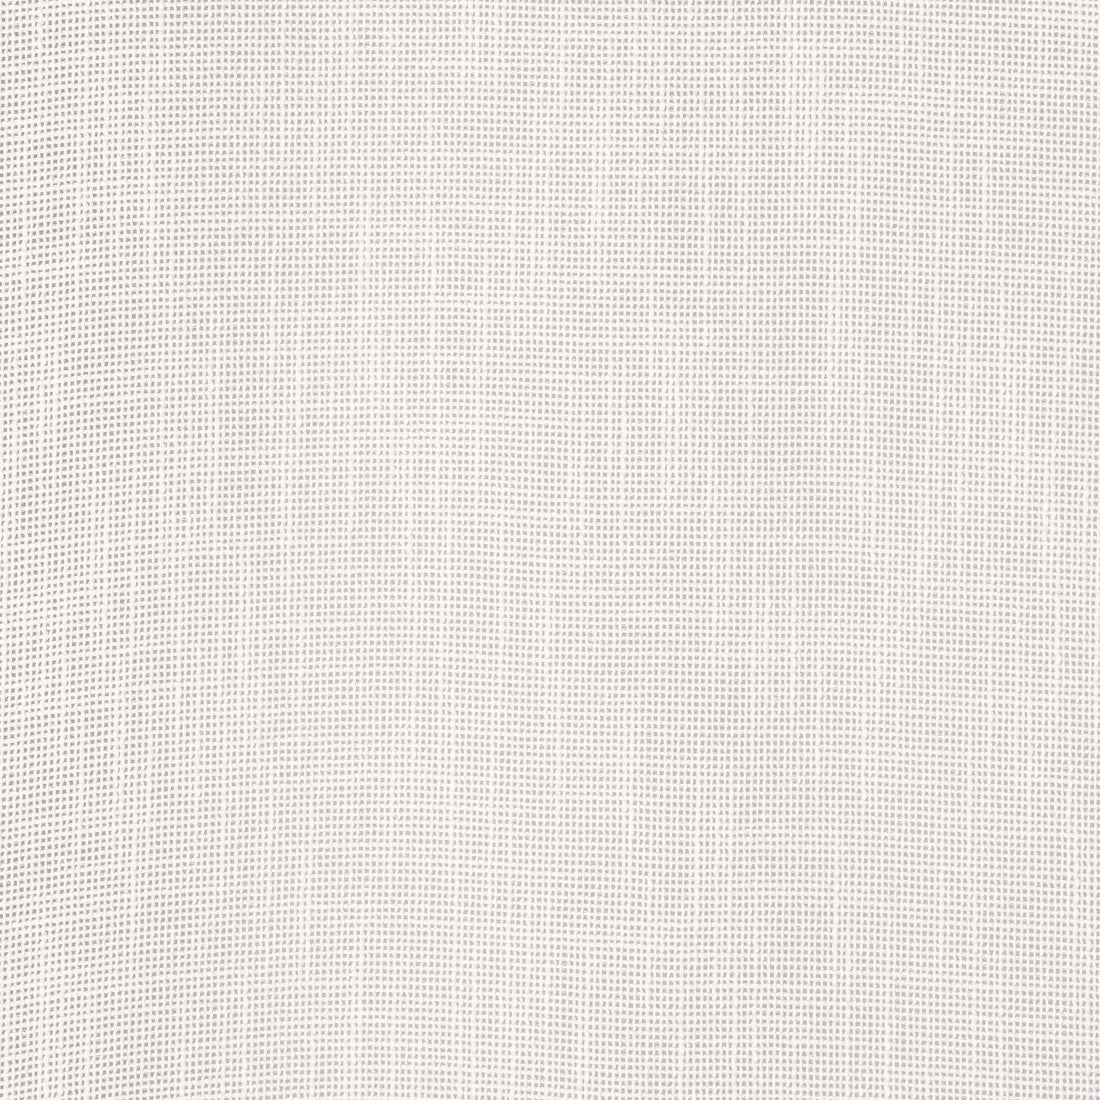 Mistral fabric in putty color - pattern number FWW8228 - by Thibaut in the Aura collection